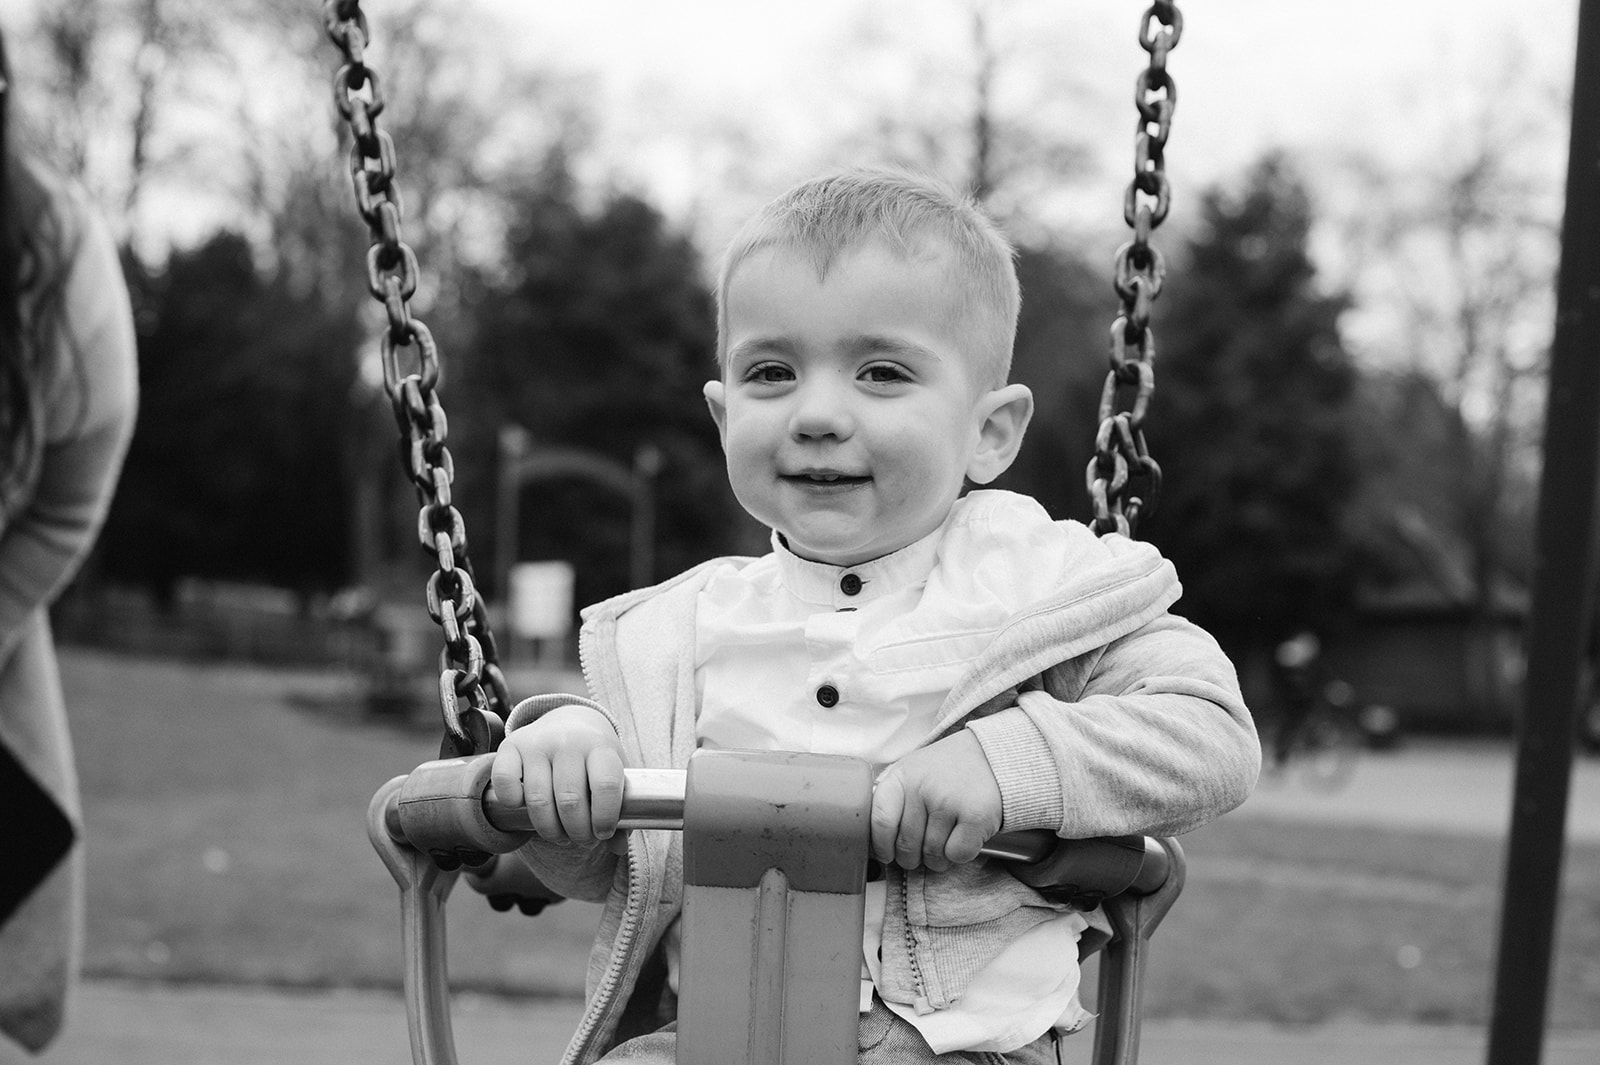 Walsall Arboretum relaxed family photographs